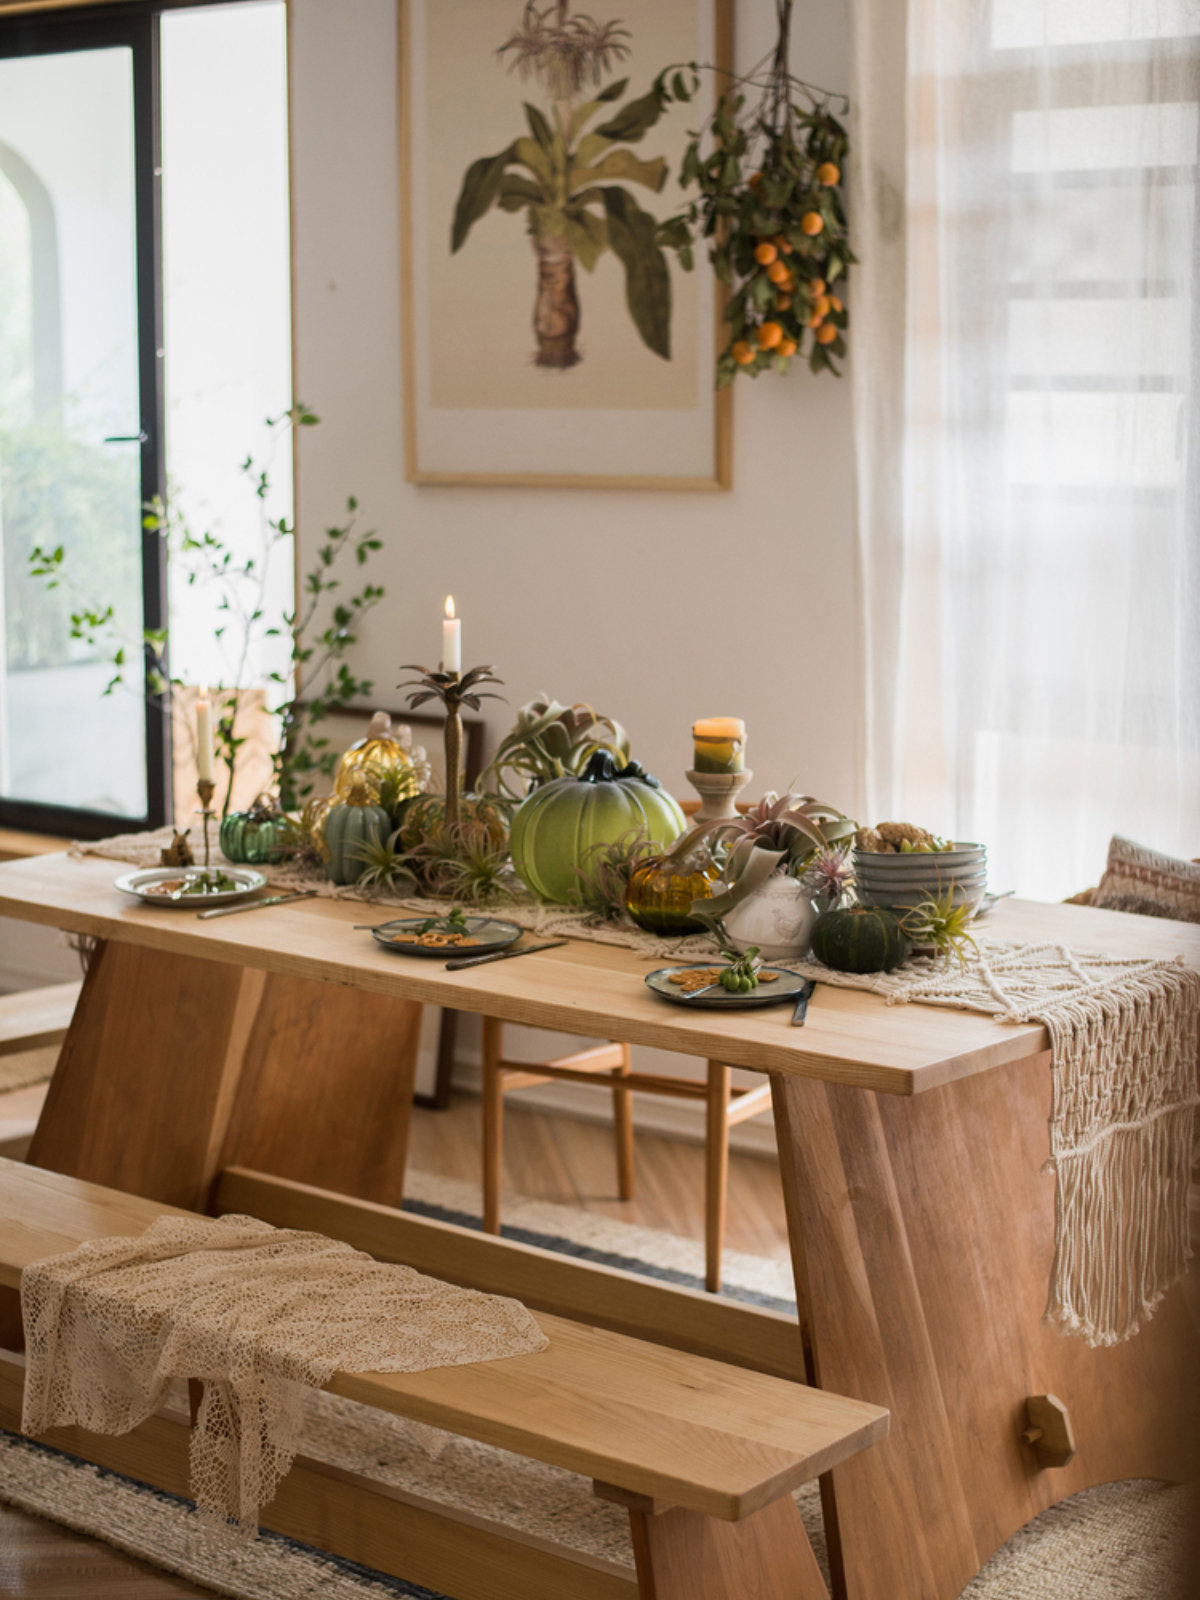 A dinning table with harvest